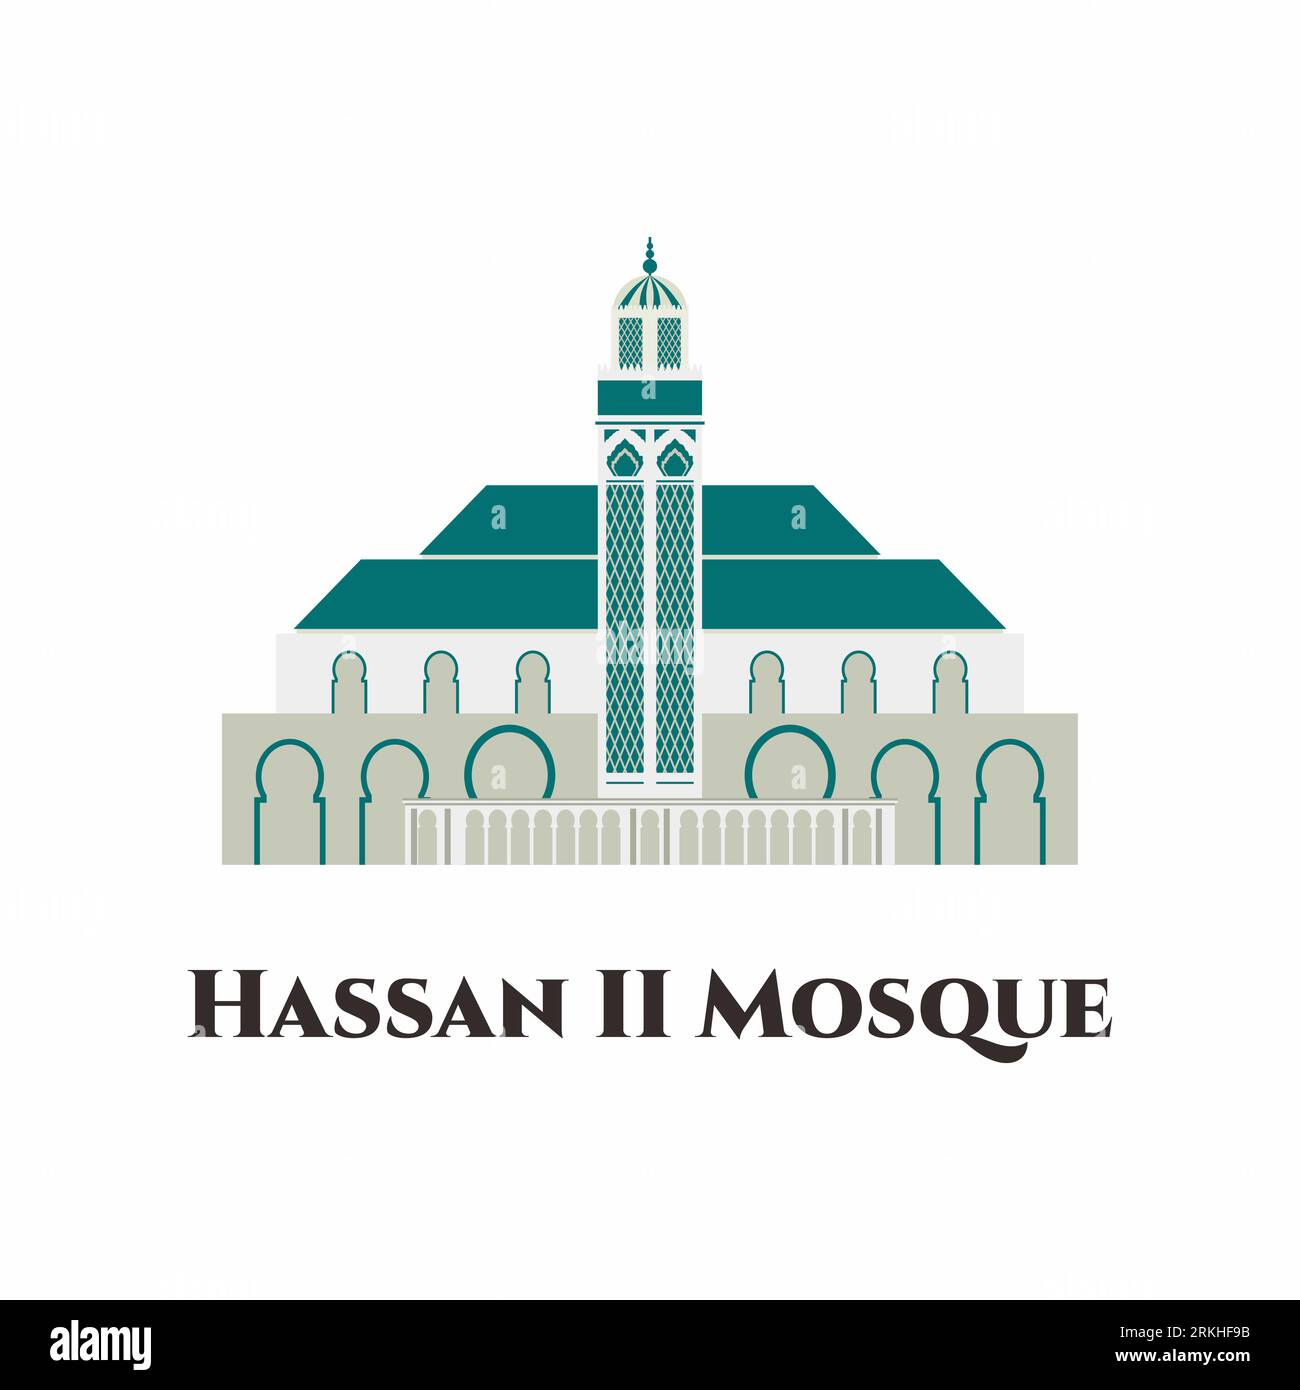 Hassan II Mosque in Morocco vector flat icon. It is the second largest functioning mosque in Africa and is the 7th largest in the world. Recommended f Stock Vector